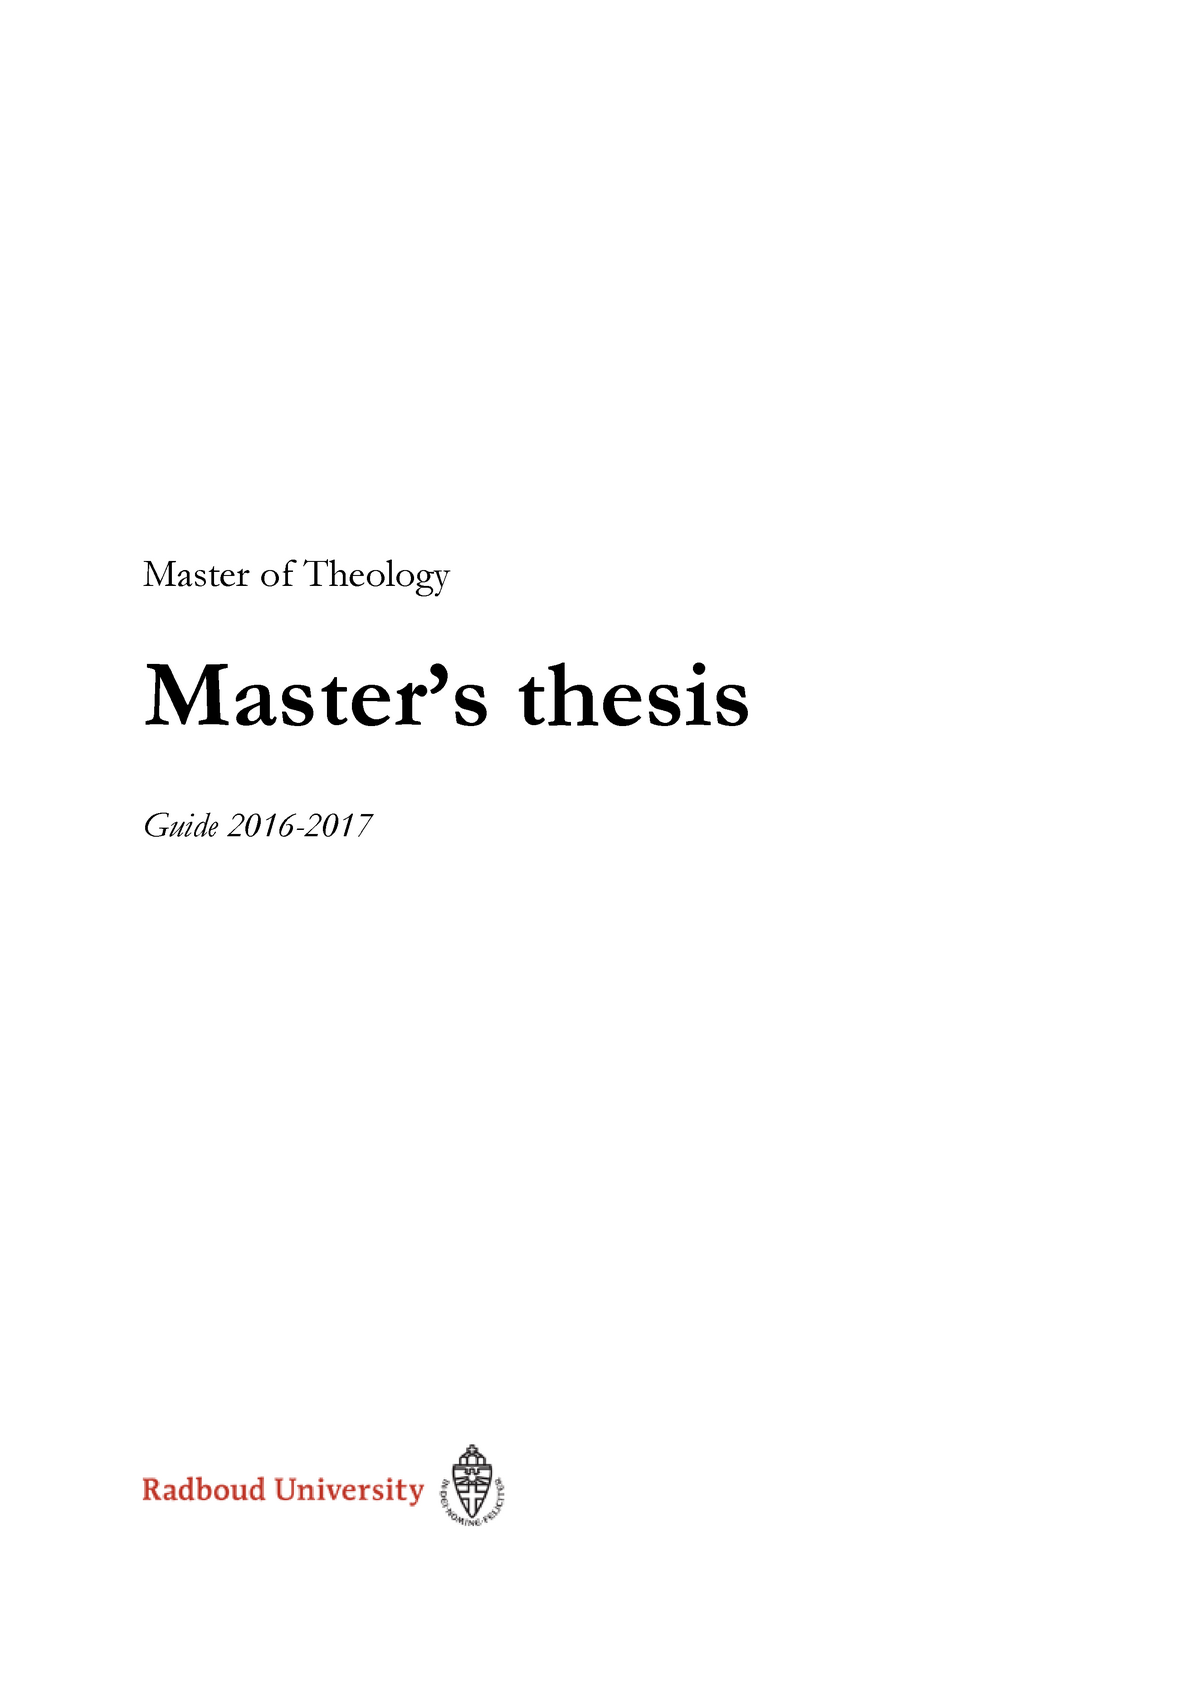 ma theology thesis